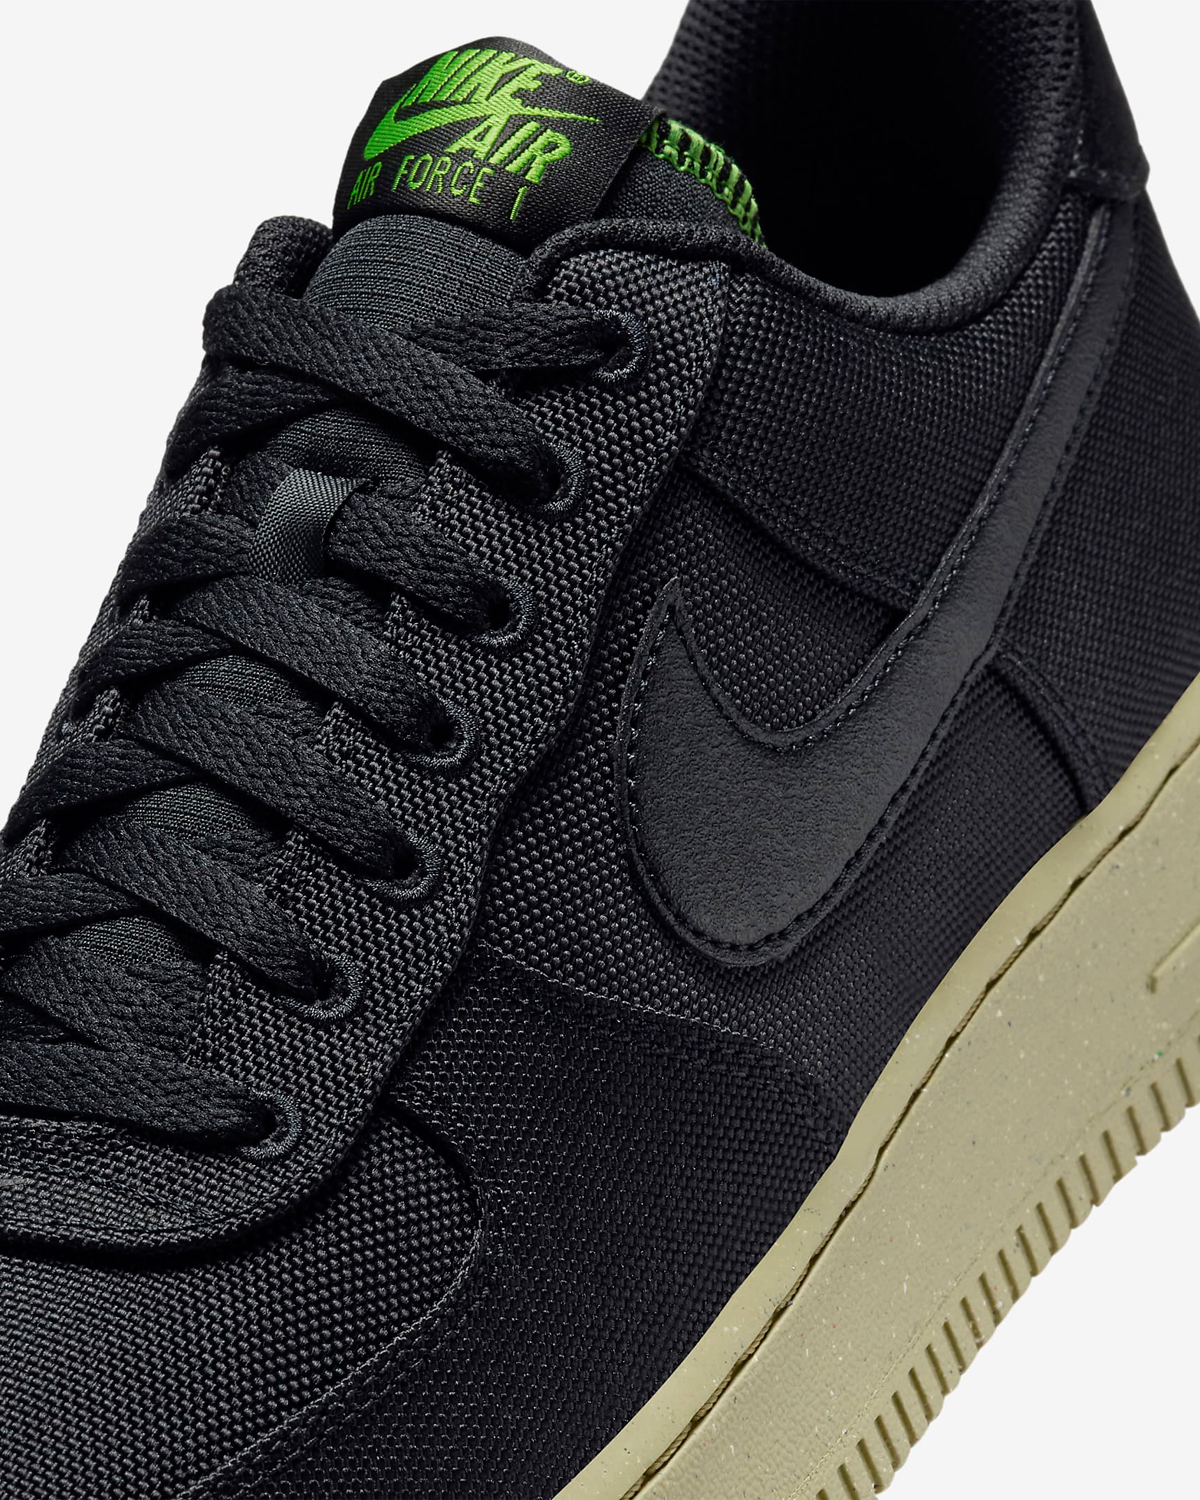 Nike-Air-Force-1-Low-Canvas-Black-Neutral-Olive-Chlorophyll-Release-Date-7